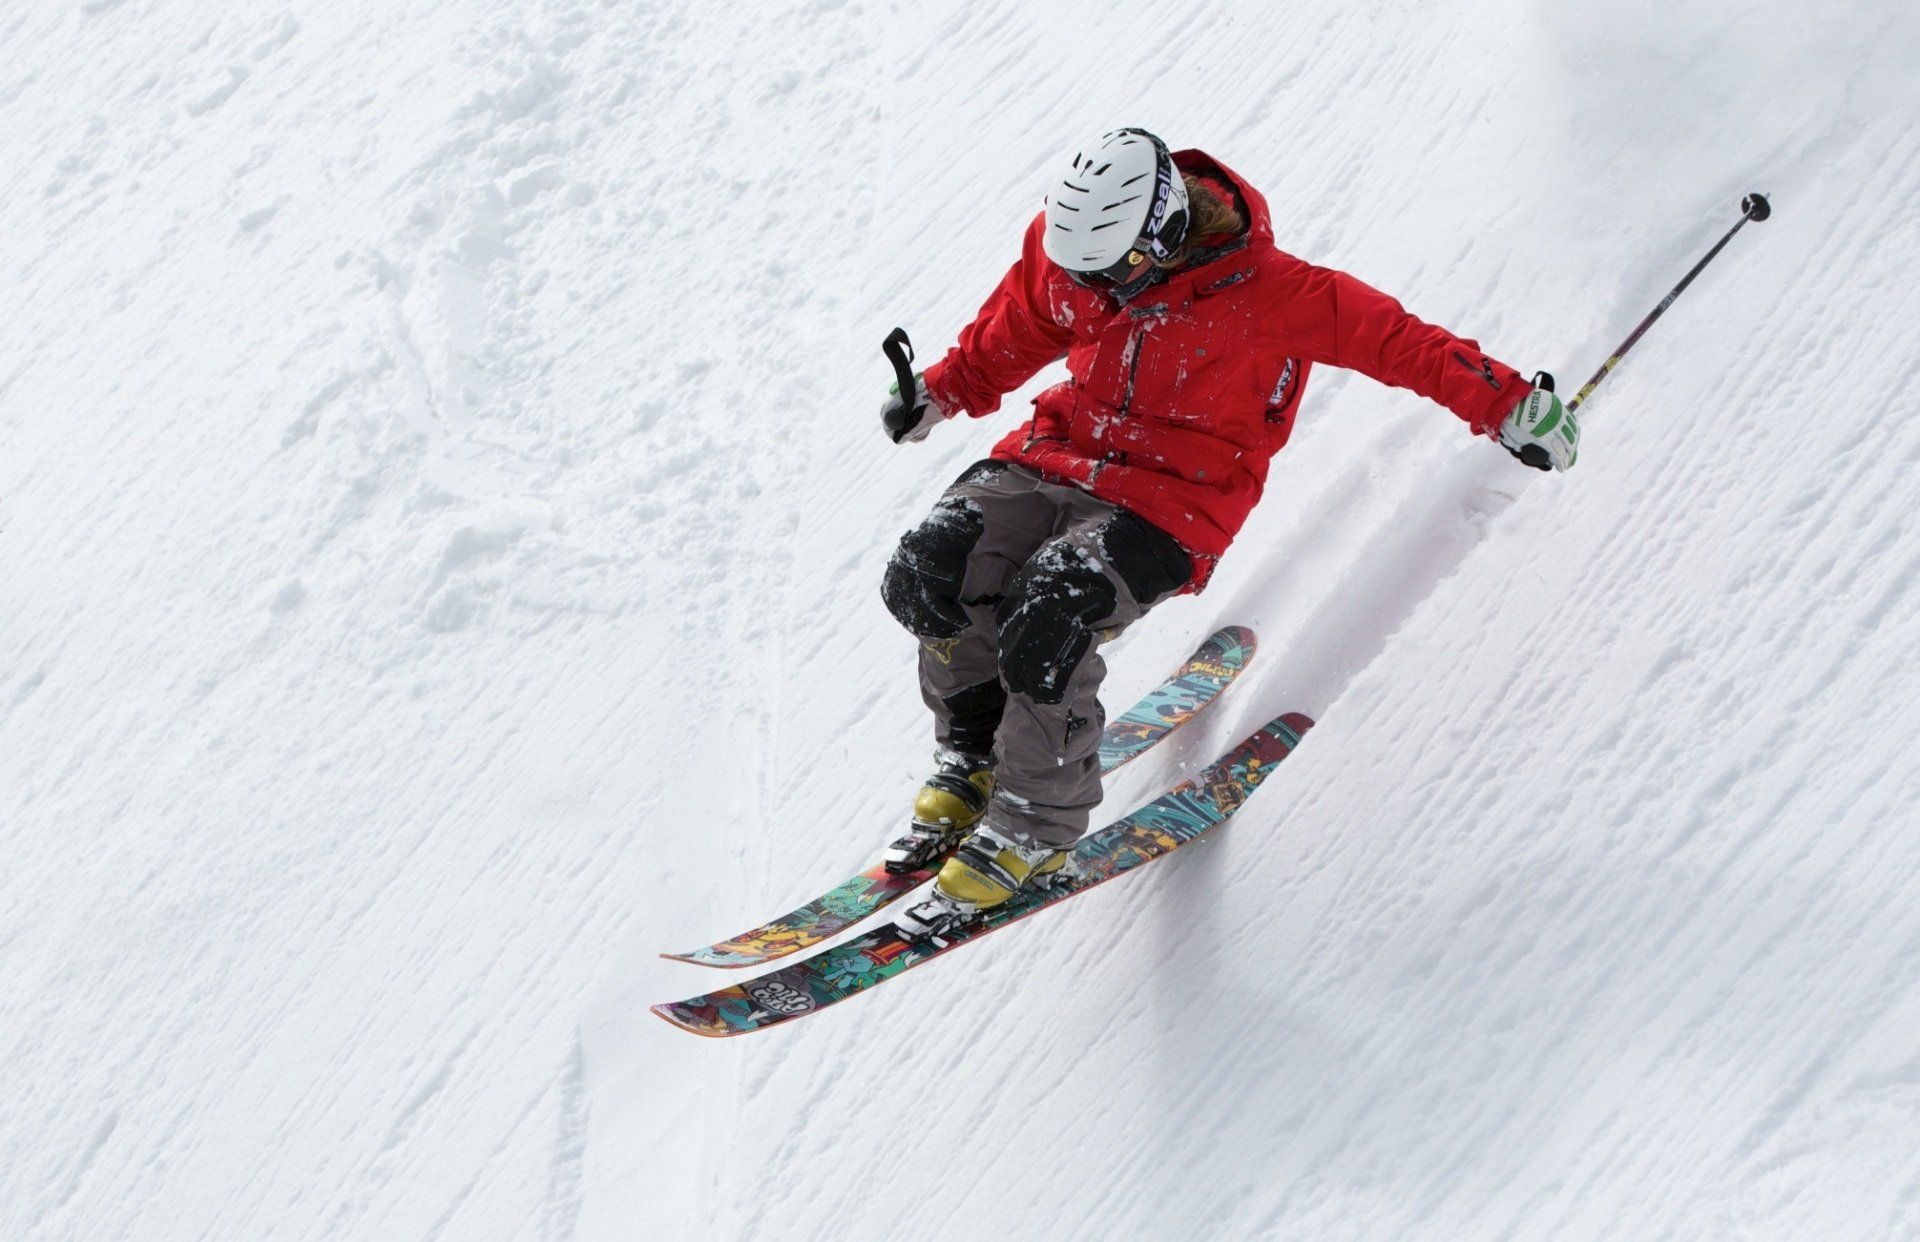 A person is skiing down a snow covered slope.